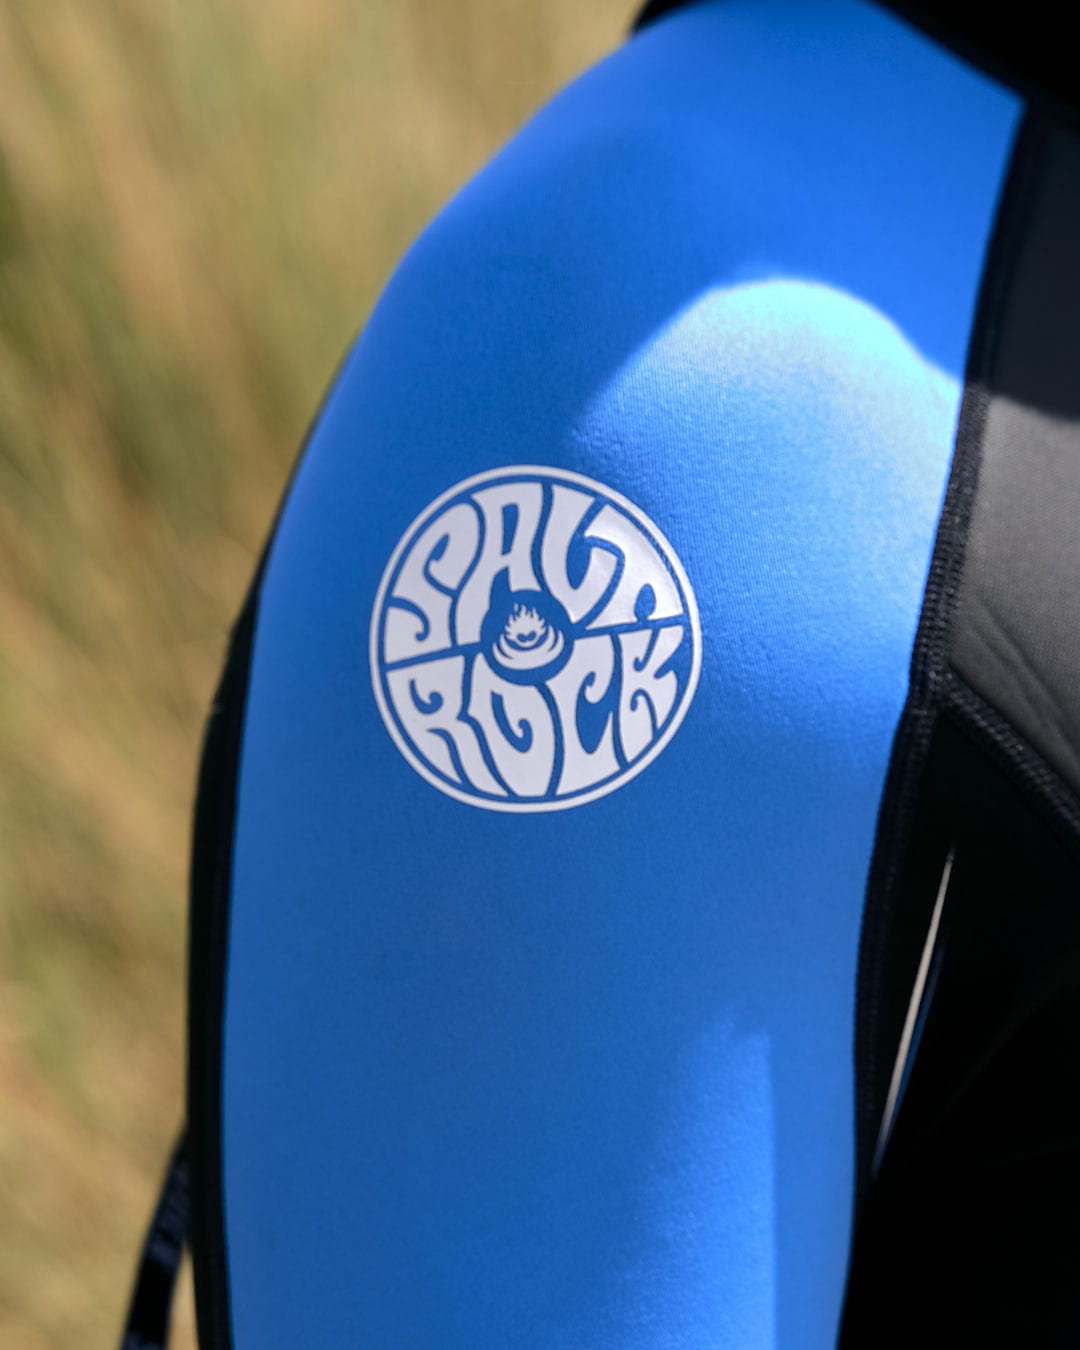 The back of a Saltrock Core - Mens 3/2 Full Wetsuit - Blue/Black with a logo on it.